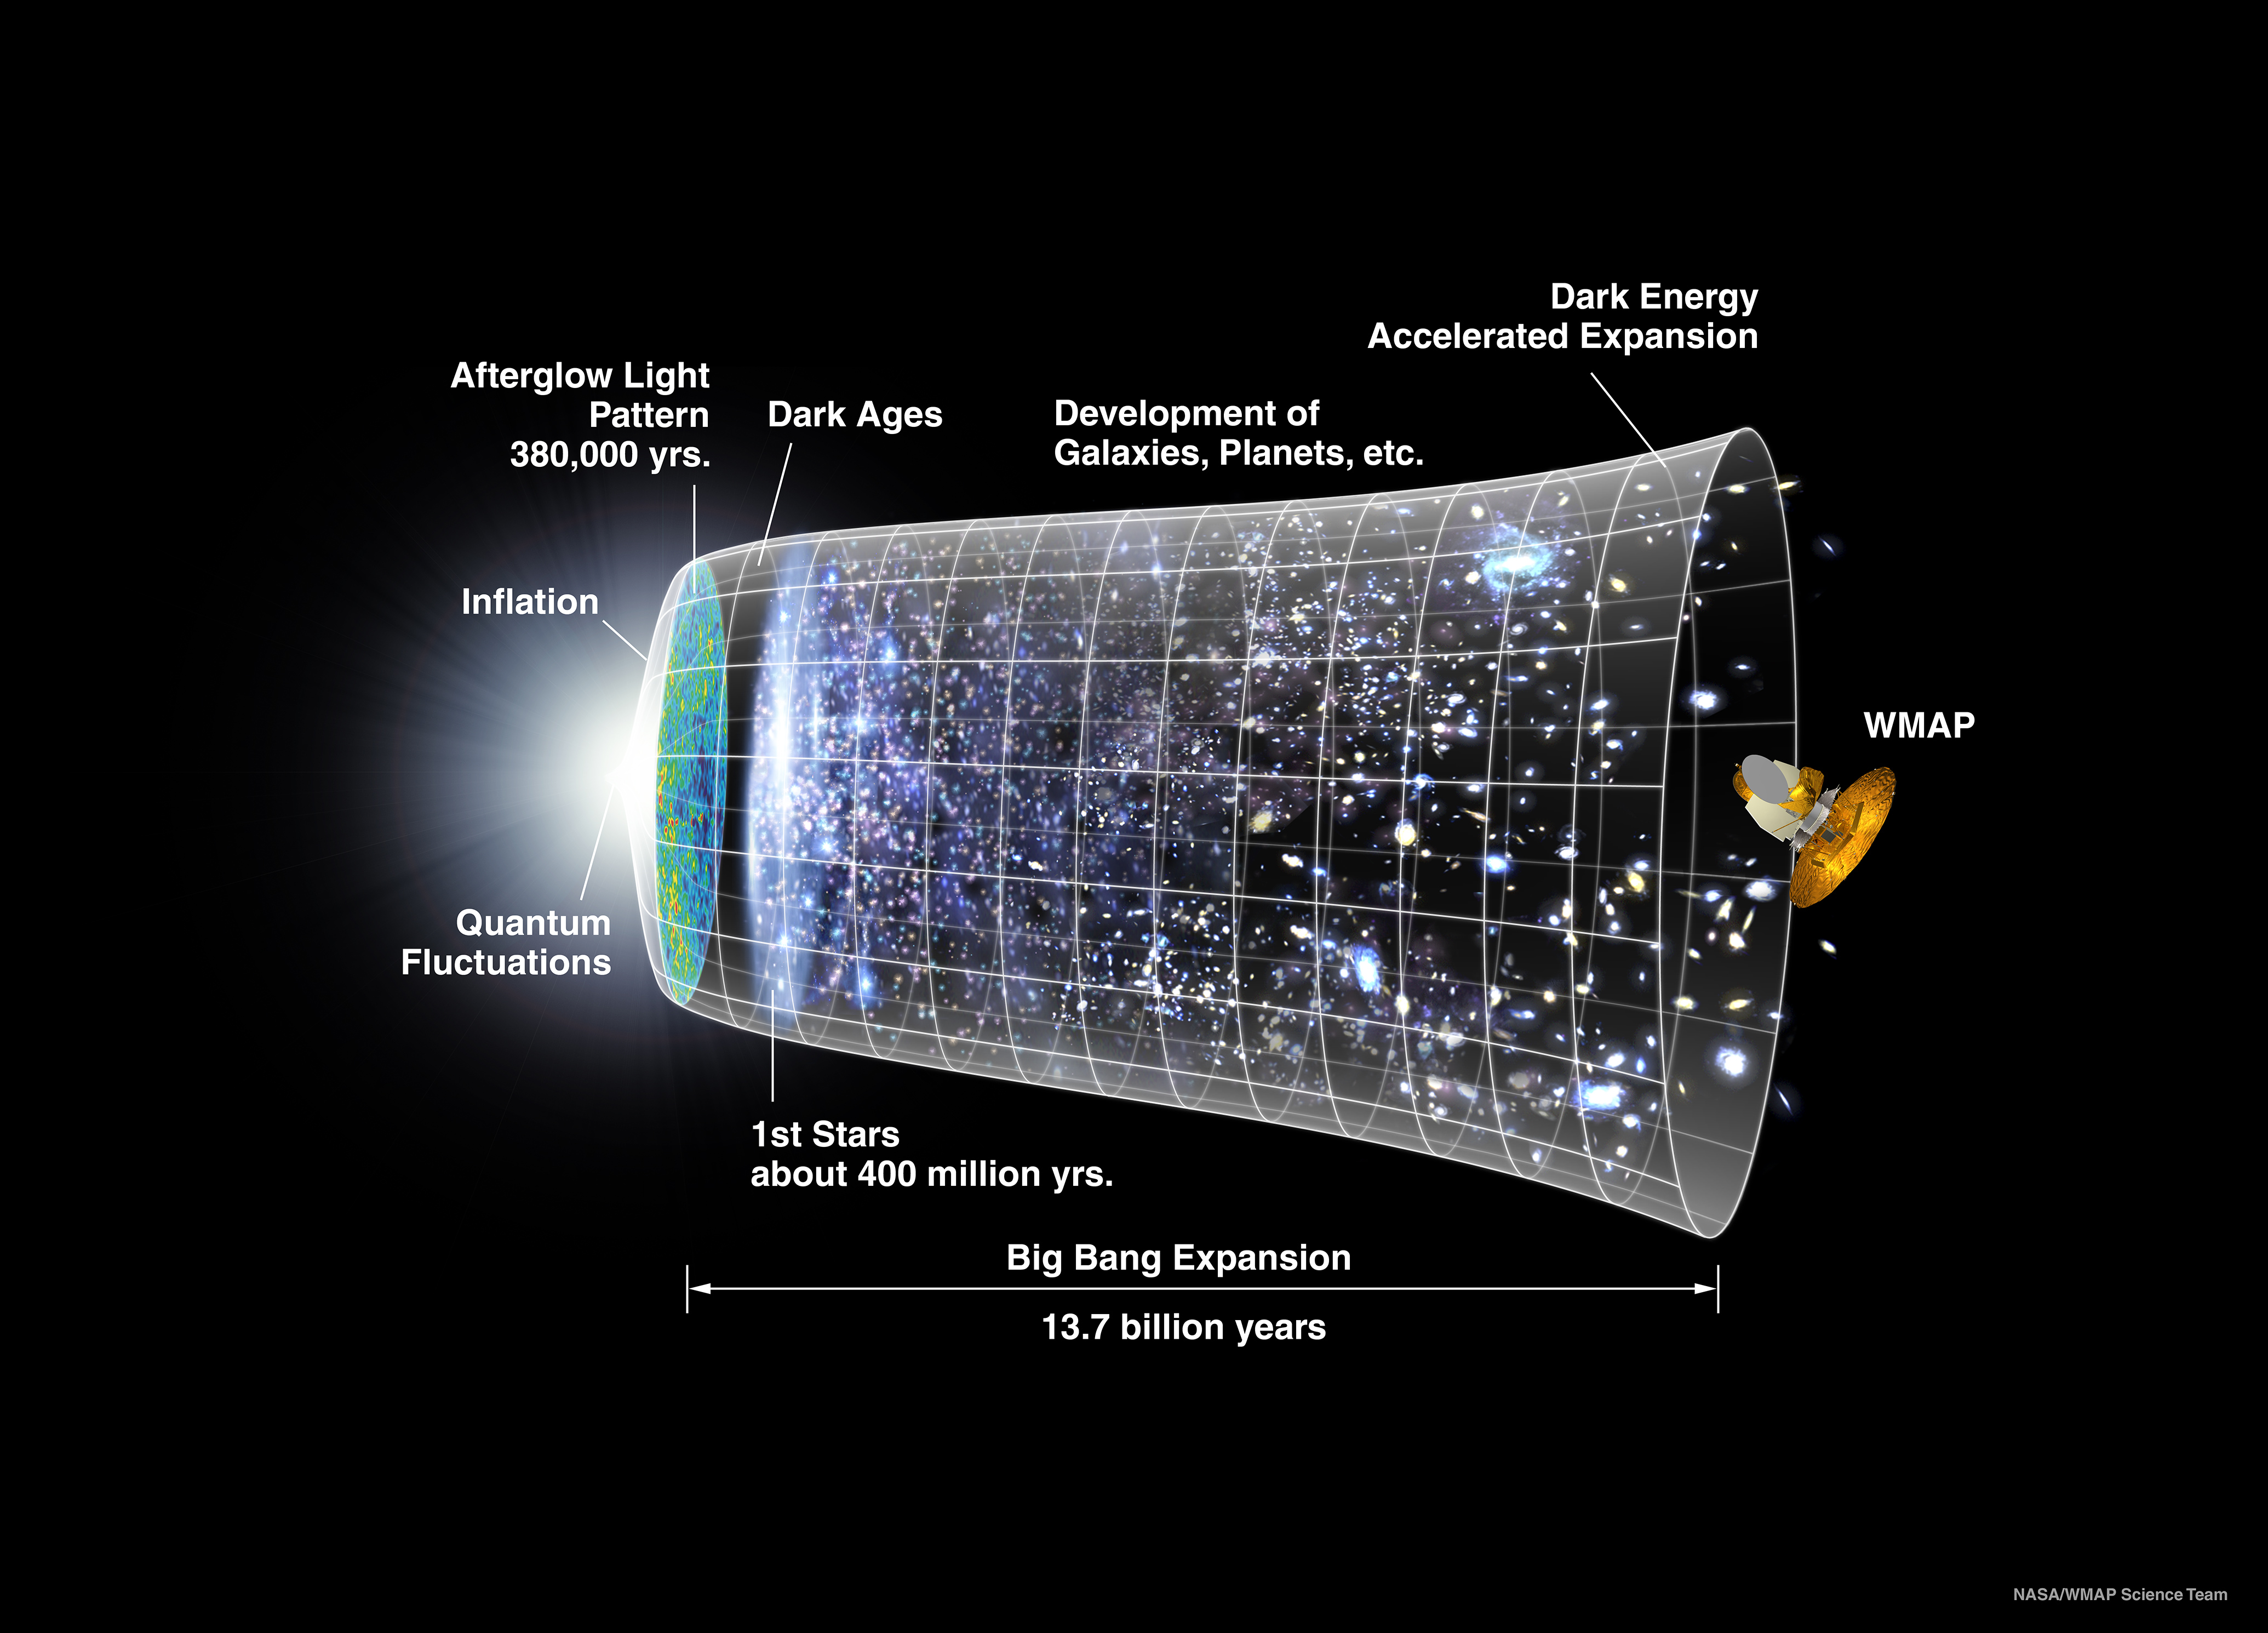  NASA/WMAP (Wilkinson Microwave Anisotropy Probe) Science Team's universe over 13.7 billion years. The far left depicts the earliest moment we can now probe, when a period of "inflation" produced a burst of exponential growth in the universe. (Size is depicted by the vertical extent of the grid in this graphic.) For the next several billion years, the expansion of the universe gradually slowed down as the matter in the universe pulled on itself via gravity. More recently, the expansion has begun to speed up again as the repulsive effects of dark energy have come to dominate the expansion of the universe. The afterglow light seen by WMAP was emitted about 380,000 years after inflation and has traversed the universe largely unimpeded since then. The conditions of earlier times are imprinted on this light; it also forms a backlight for later developments of the universe.